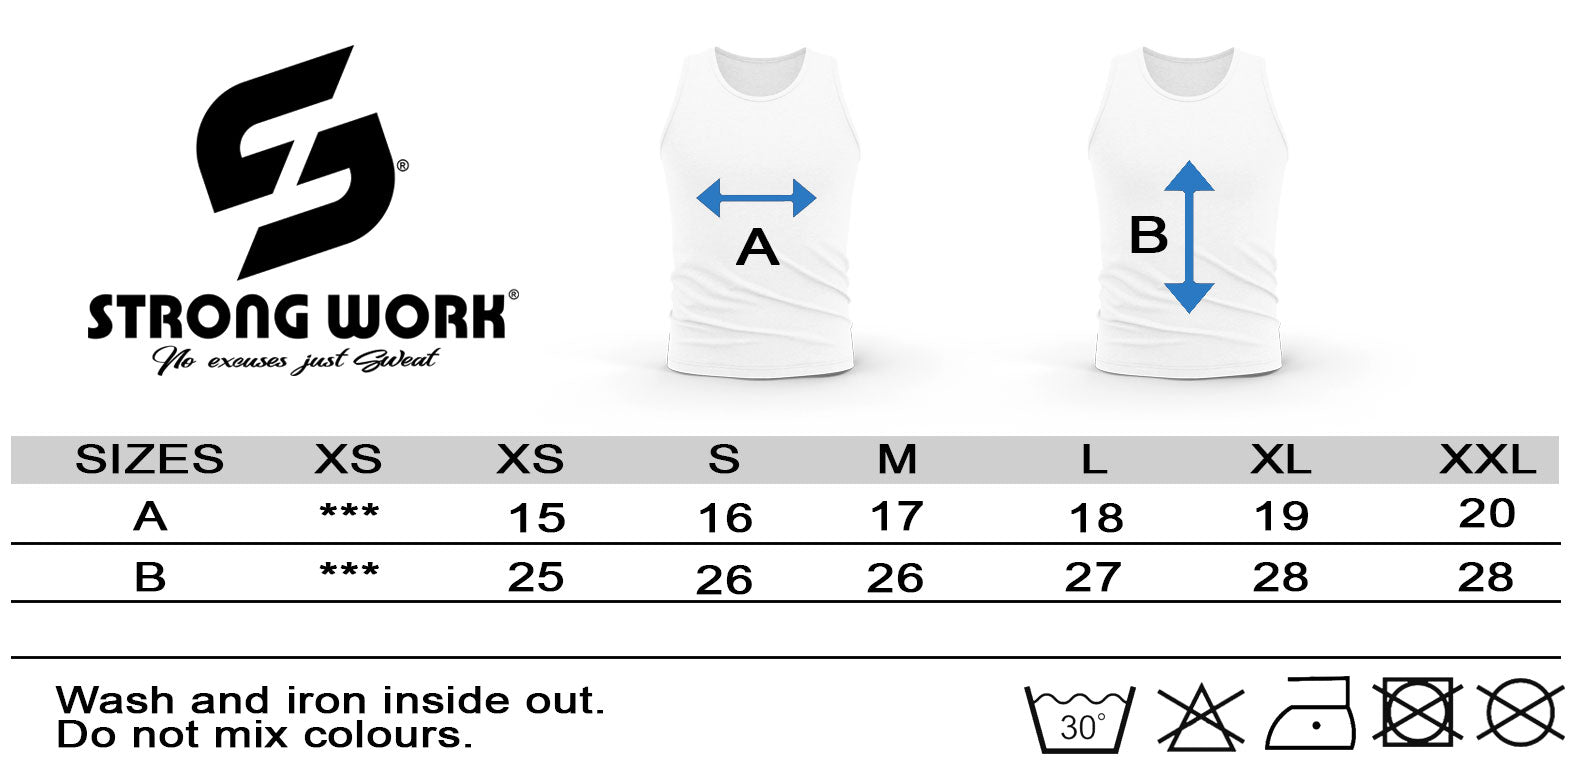 STRONG WORK FITNESS SIZE GUIDE - SUSTAINABLE TANK TOP FOR WOMEN